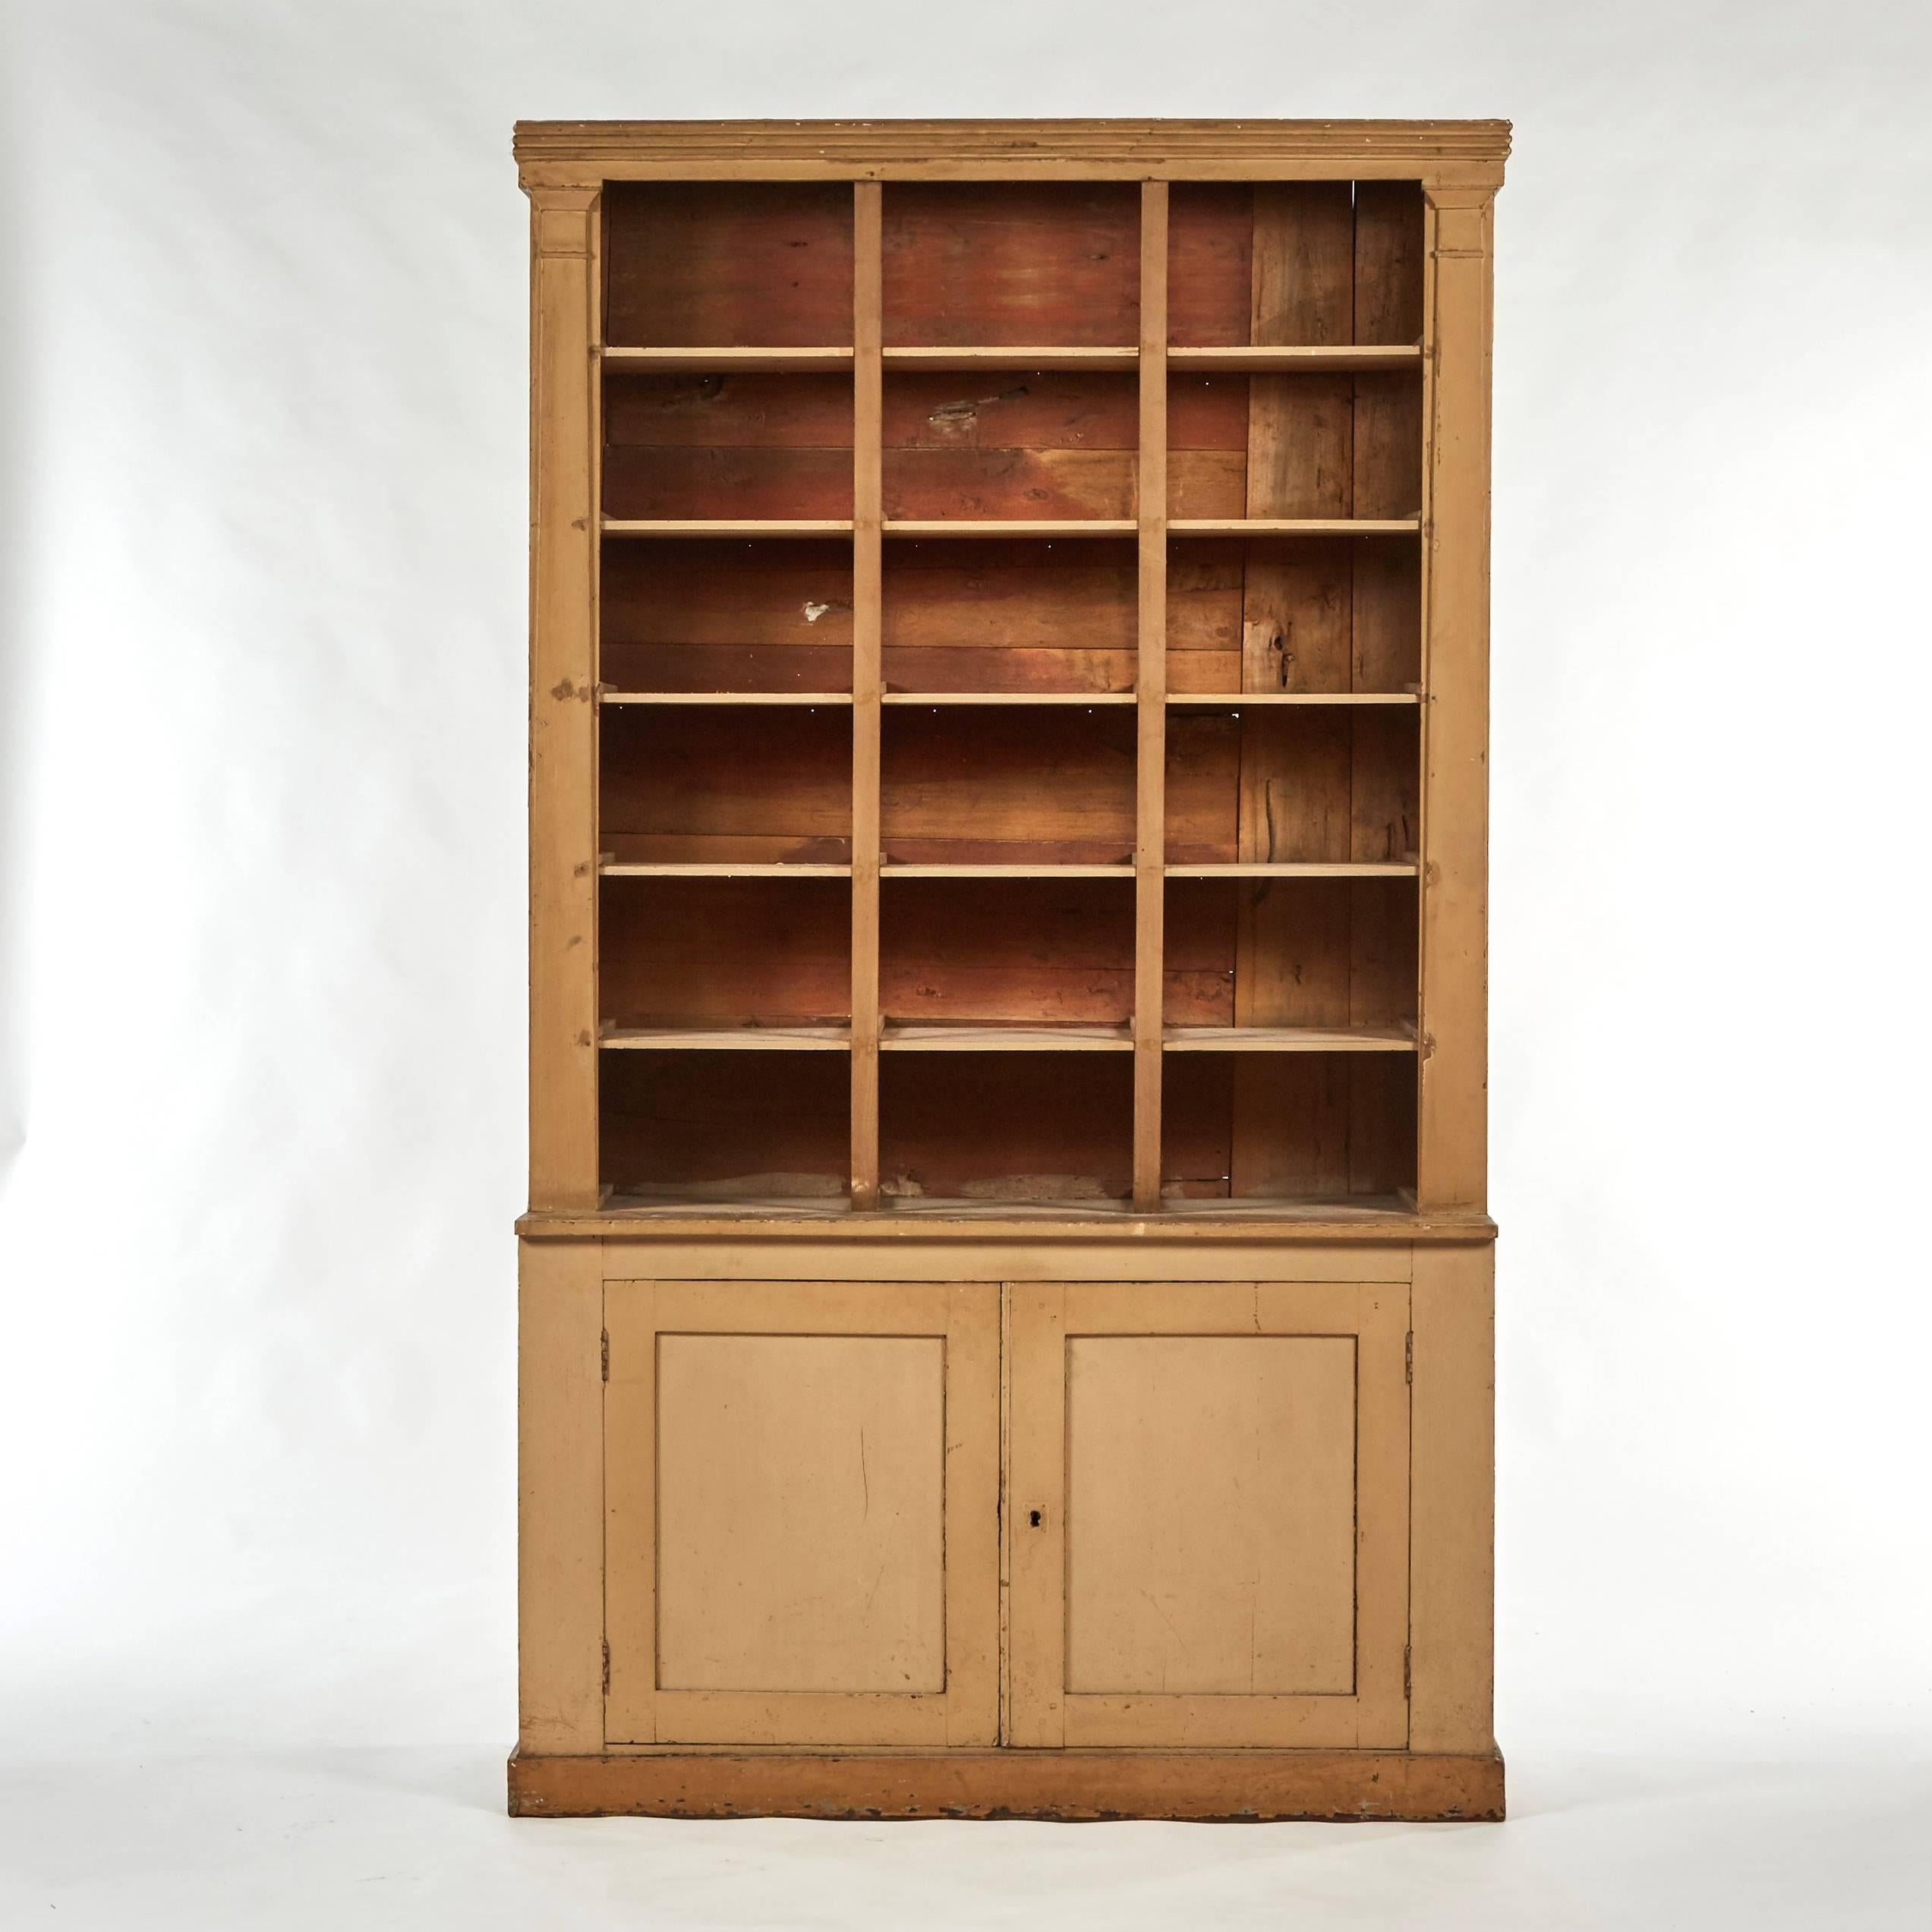 1790s French large painted Directoire era bookcase with lower cabinet.